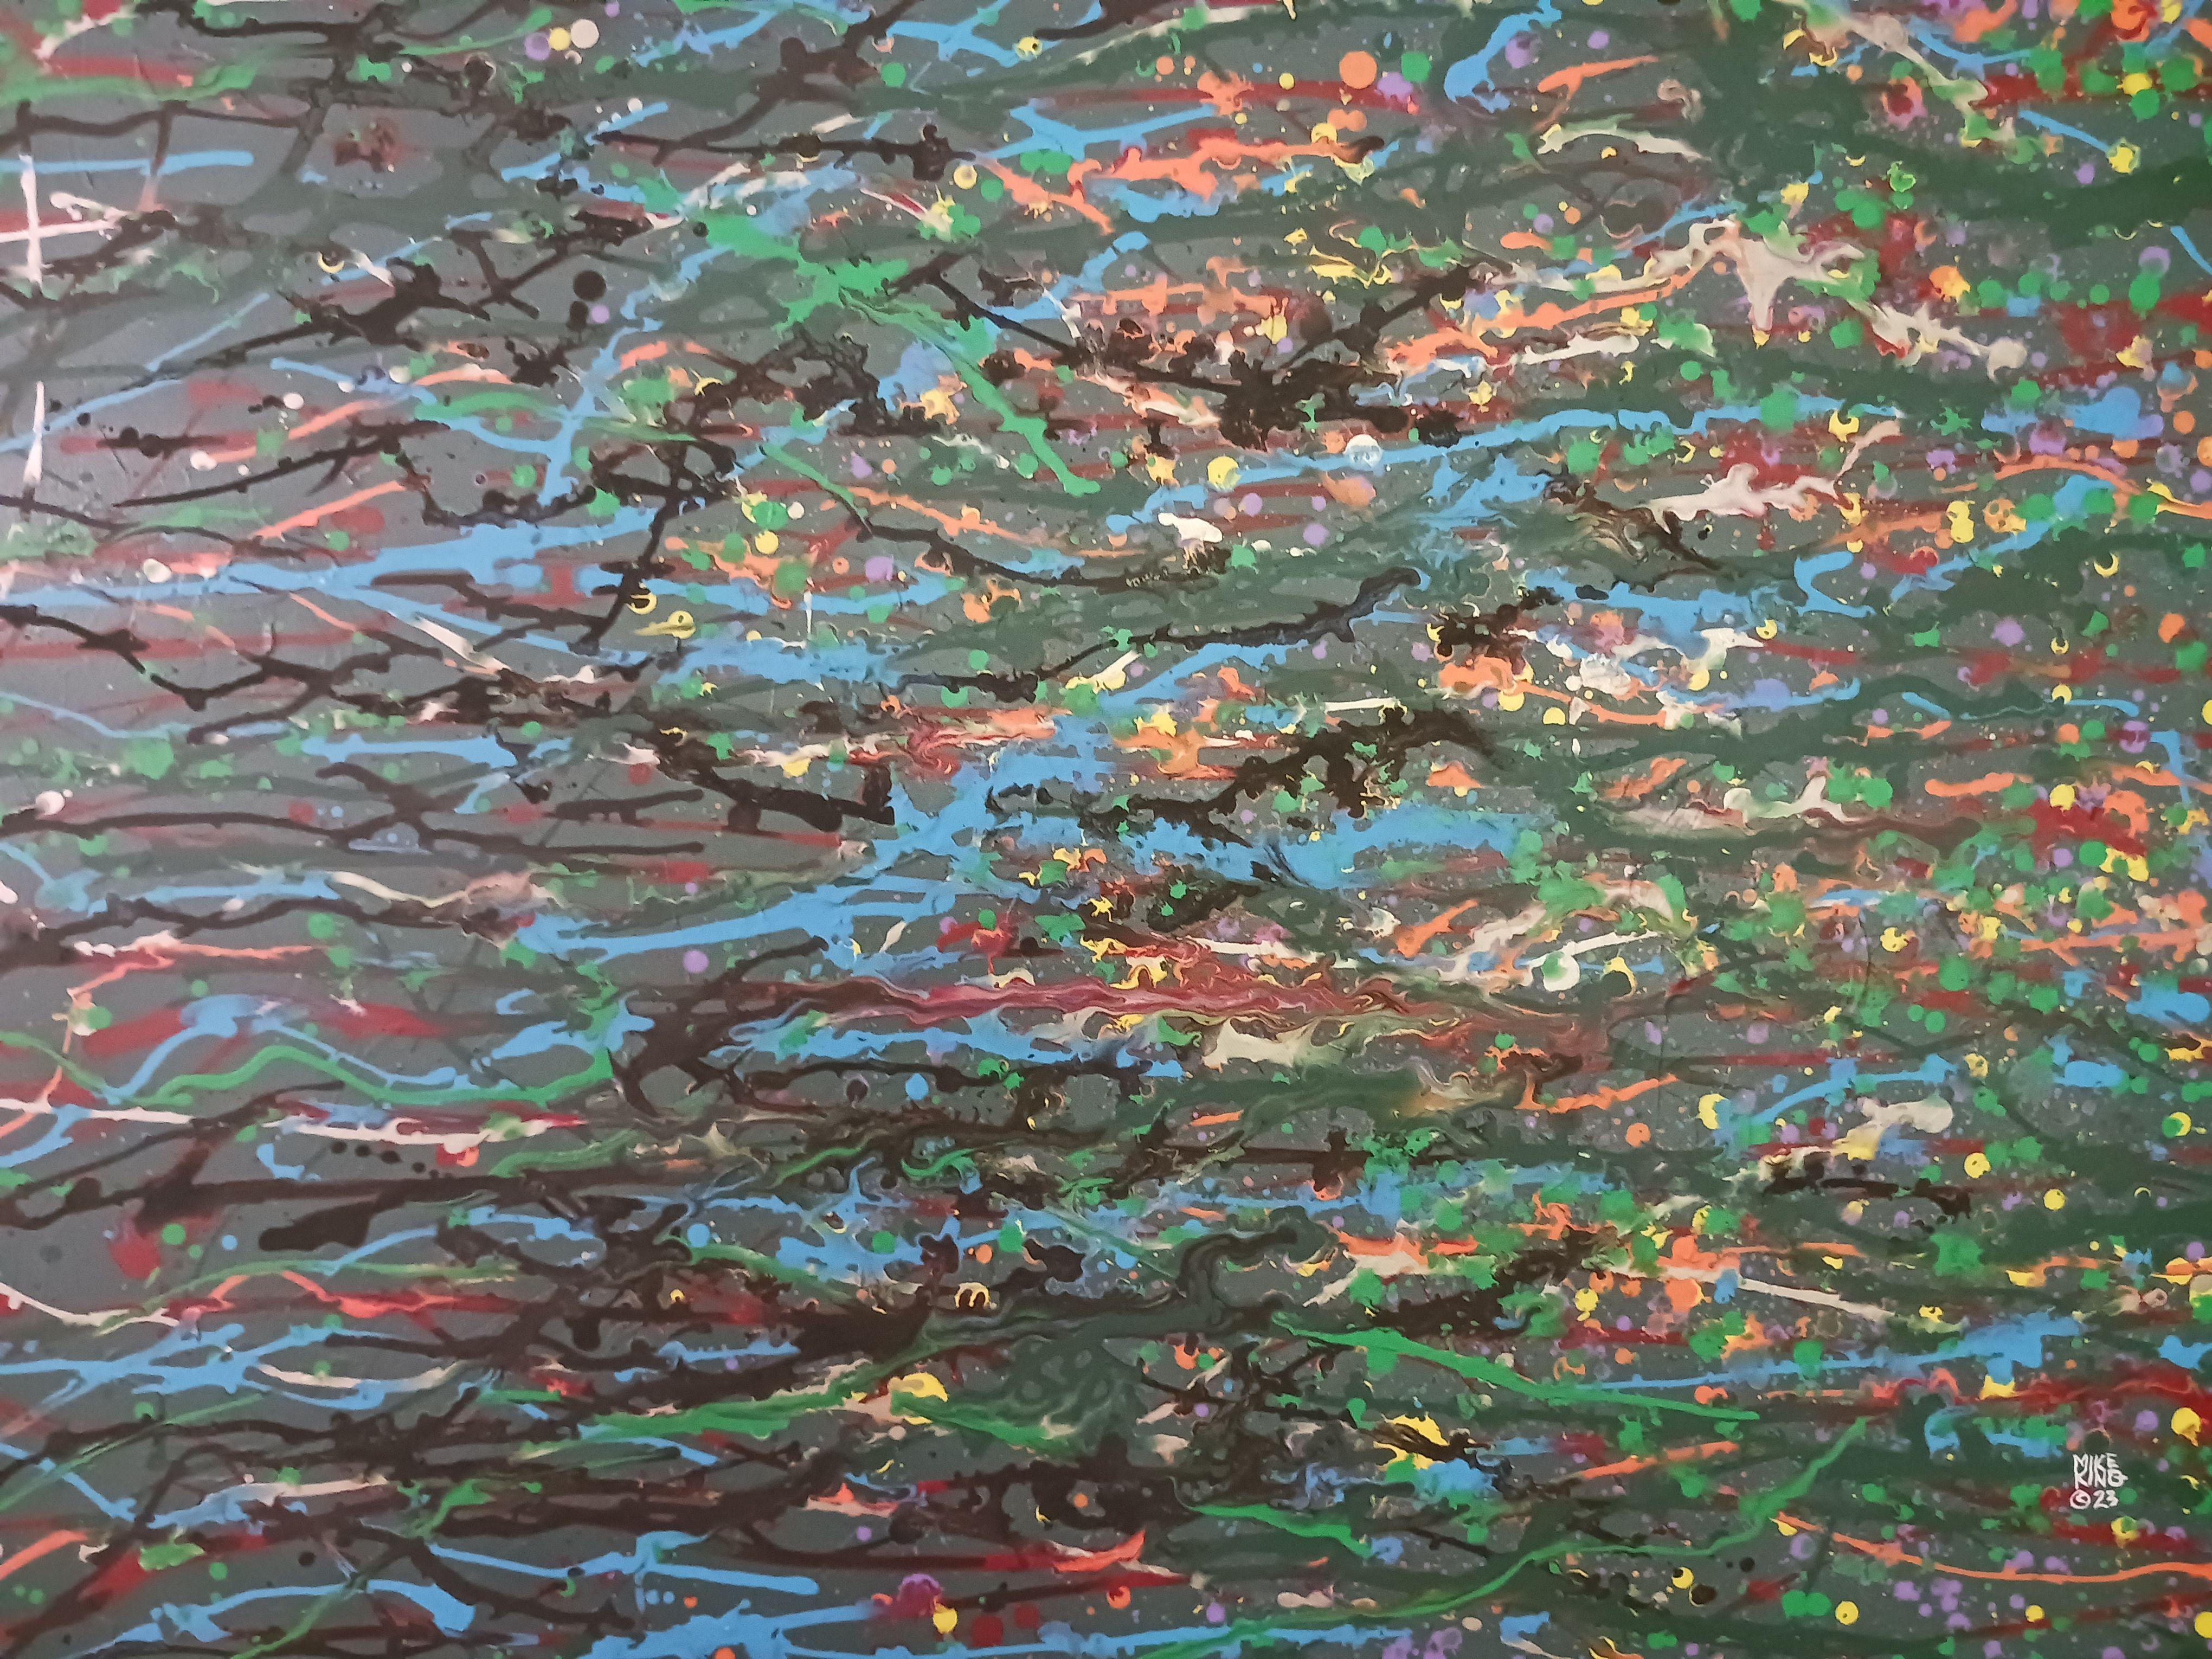 This was painted spontaneously and intuitively. I wanted to figuratively paint an abstract of the sea at dusk with reflections of bright, colorful light bouncing from it. :: Painting :: Abstract Expressionism :: This piece comes with an official